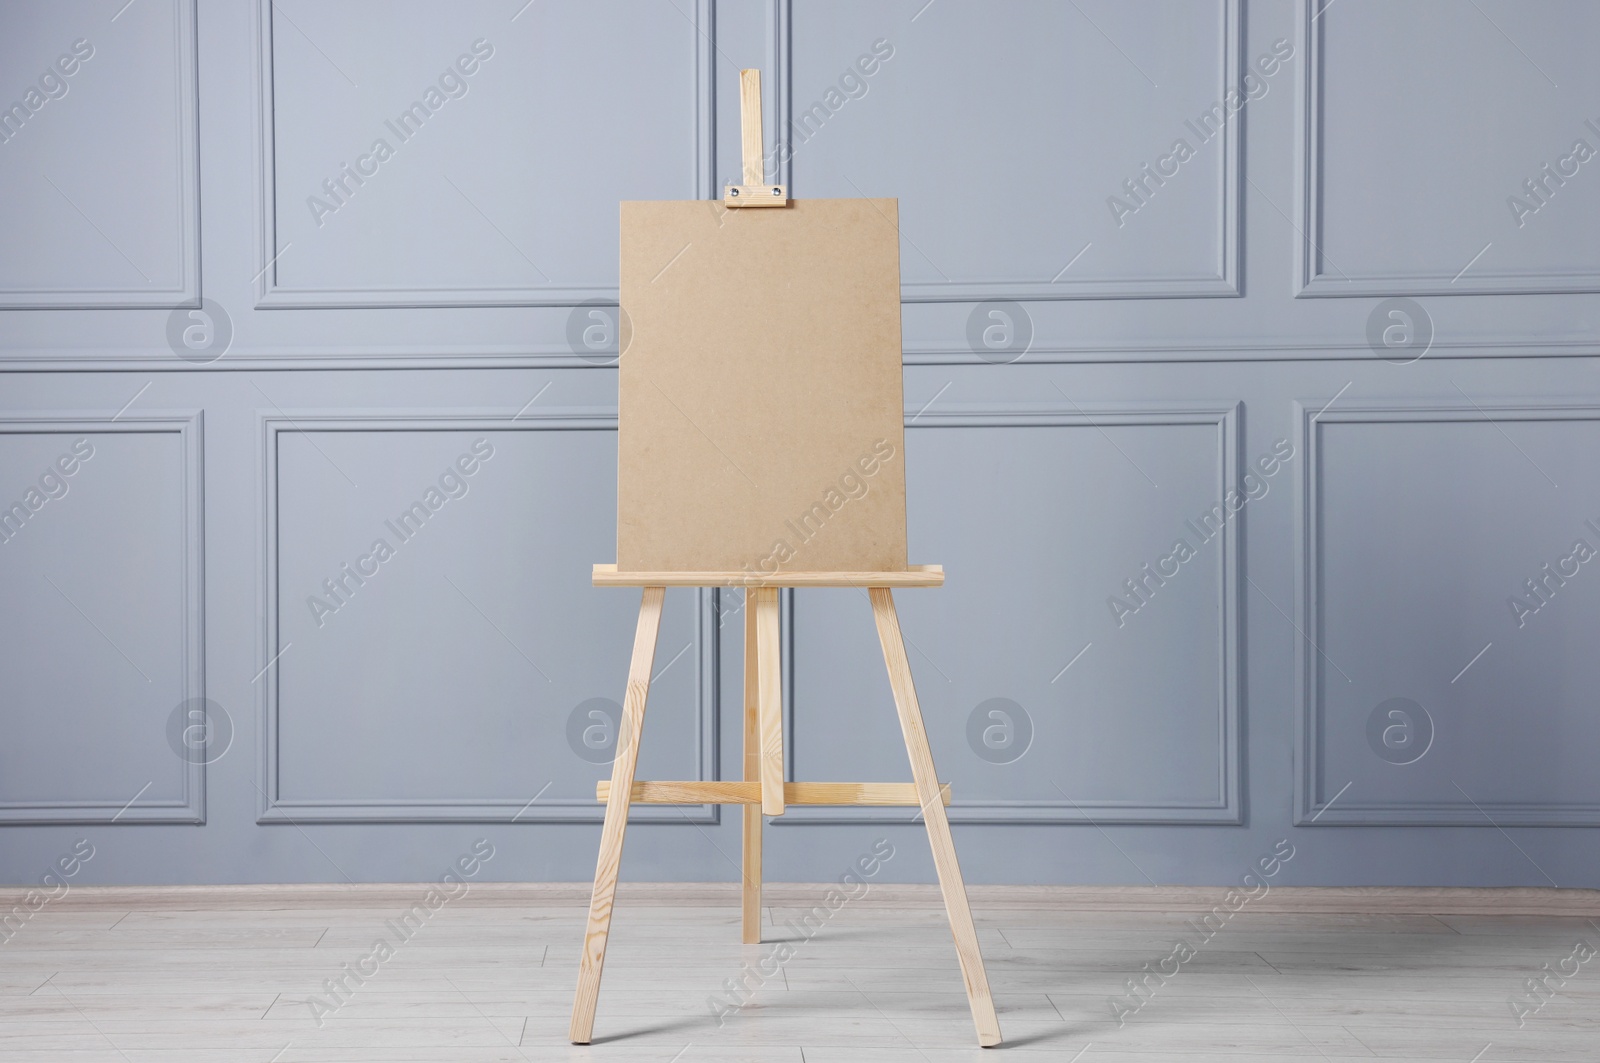 Photo of Wooden easel with blank board near grey wall indoors